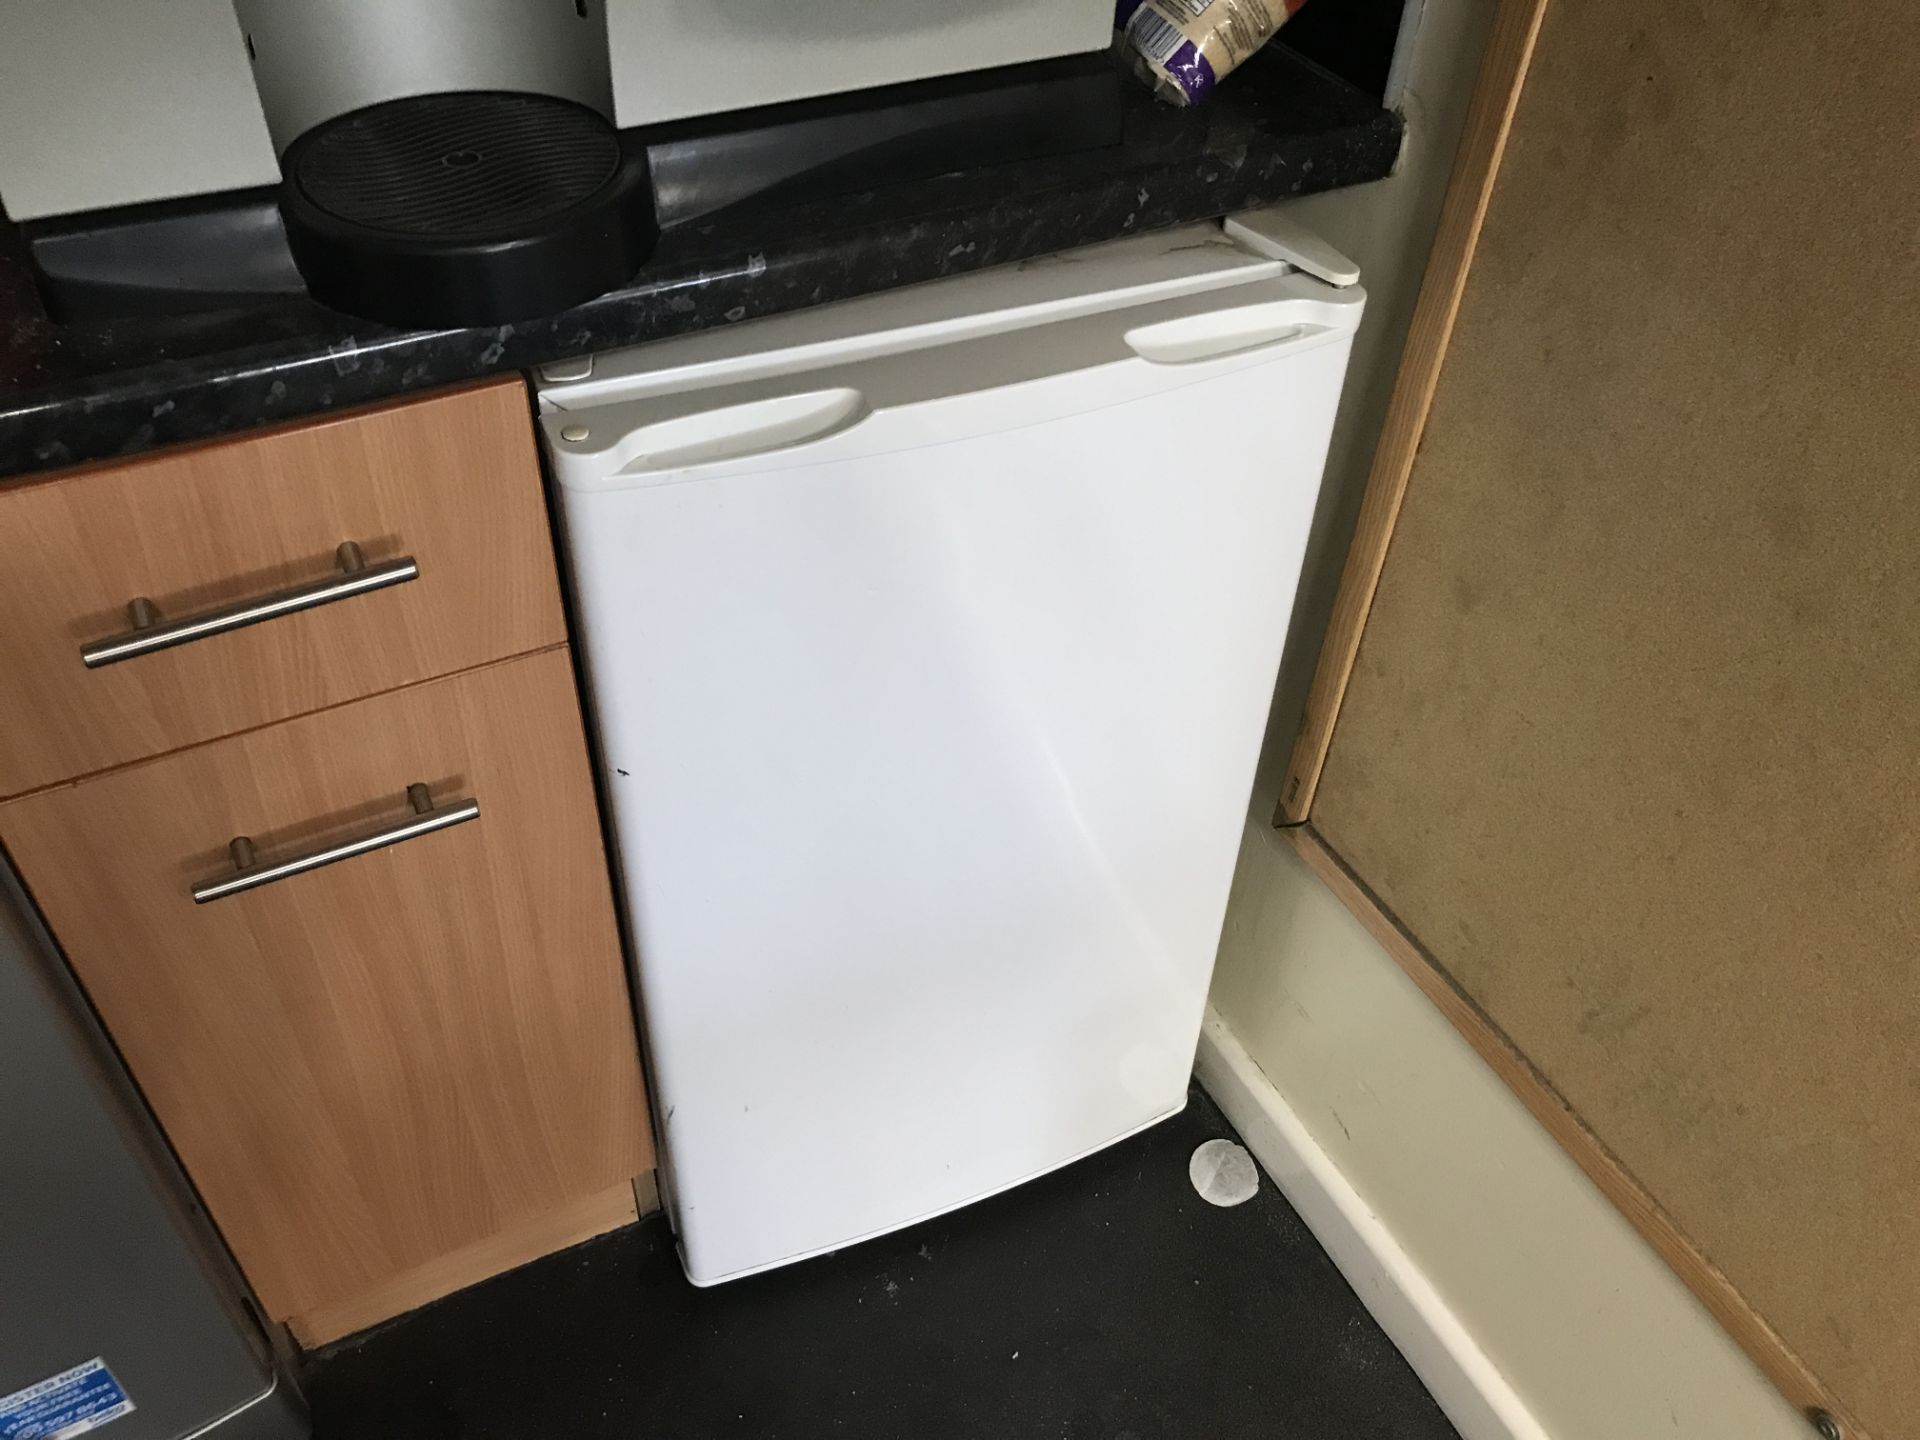 Beko DWD5414S Dishwasher, Refrigerator, Two Toasters and Microwave (lot located at Bedfords - Image 4 of 4